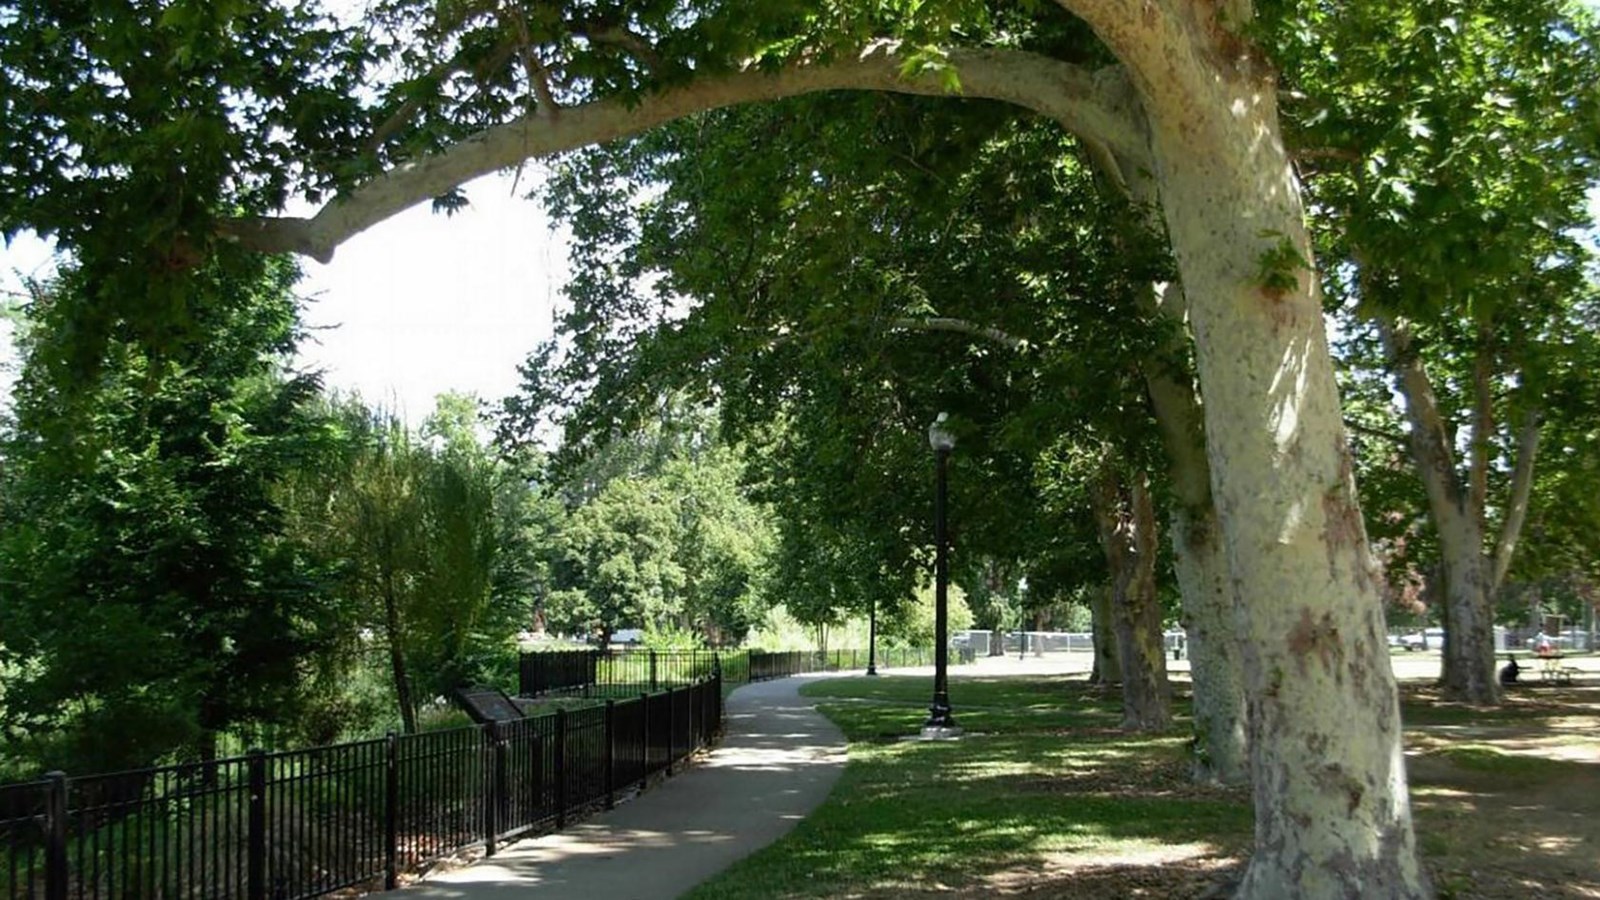 cement trail through a park with trees and a fence running along the path